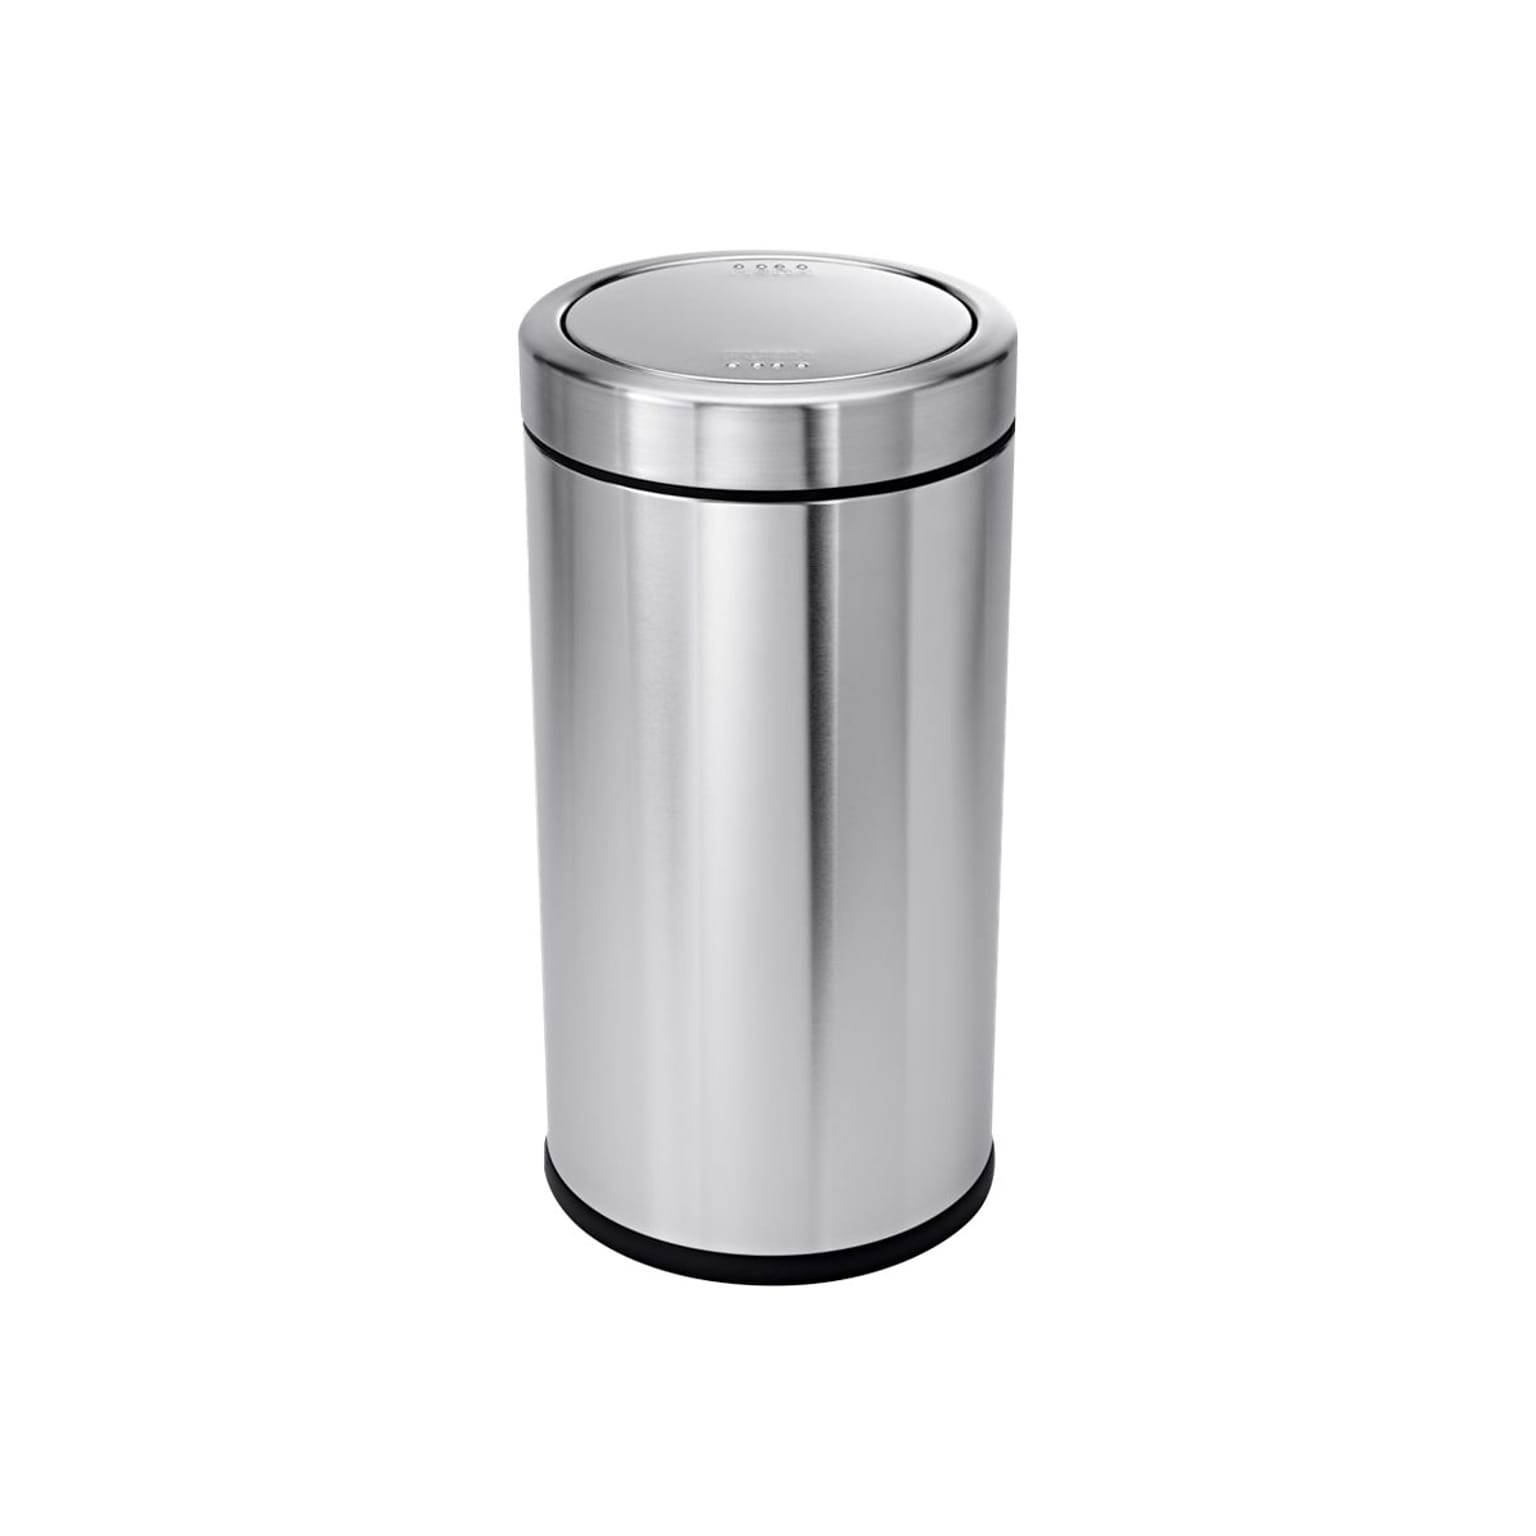 simplehuman Indoor Swing Lid Trash Can, Brushed Stainless Steel, 14.5 Gal. (CW1442)